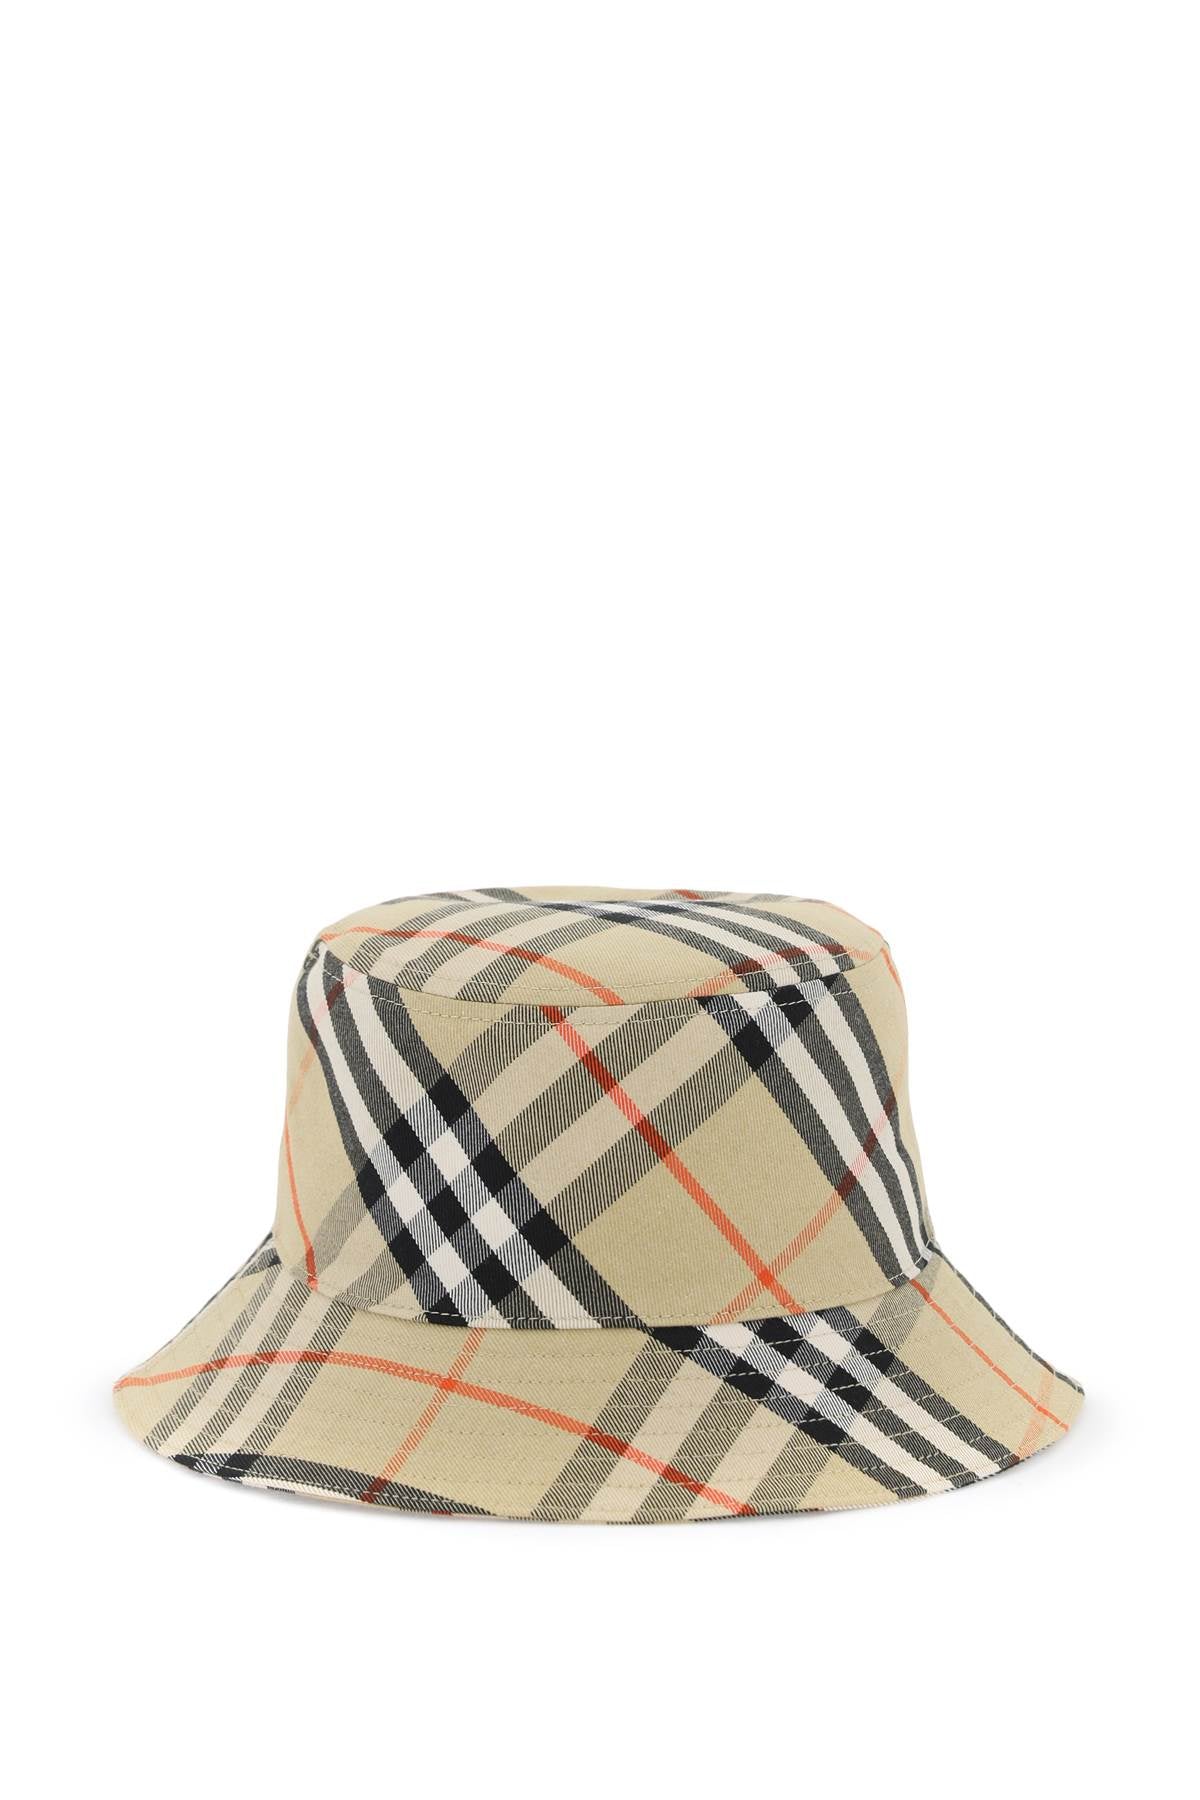 Burberry ered cotton blend bucket hat with nine words 8085726 SAND